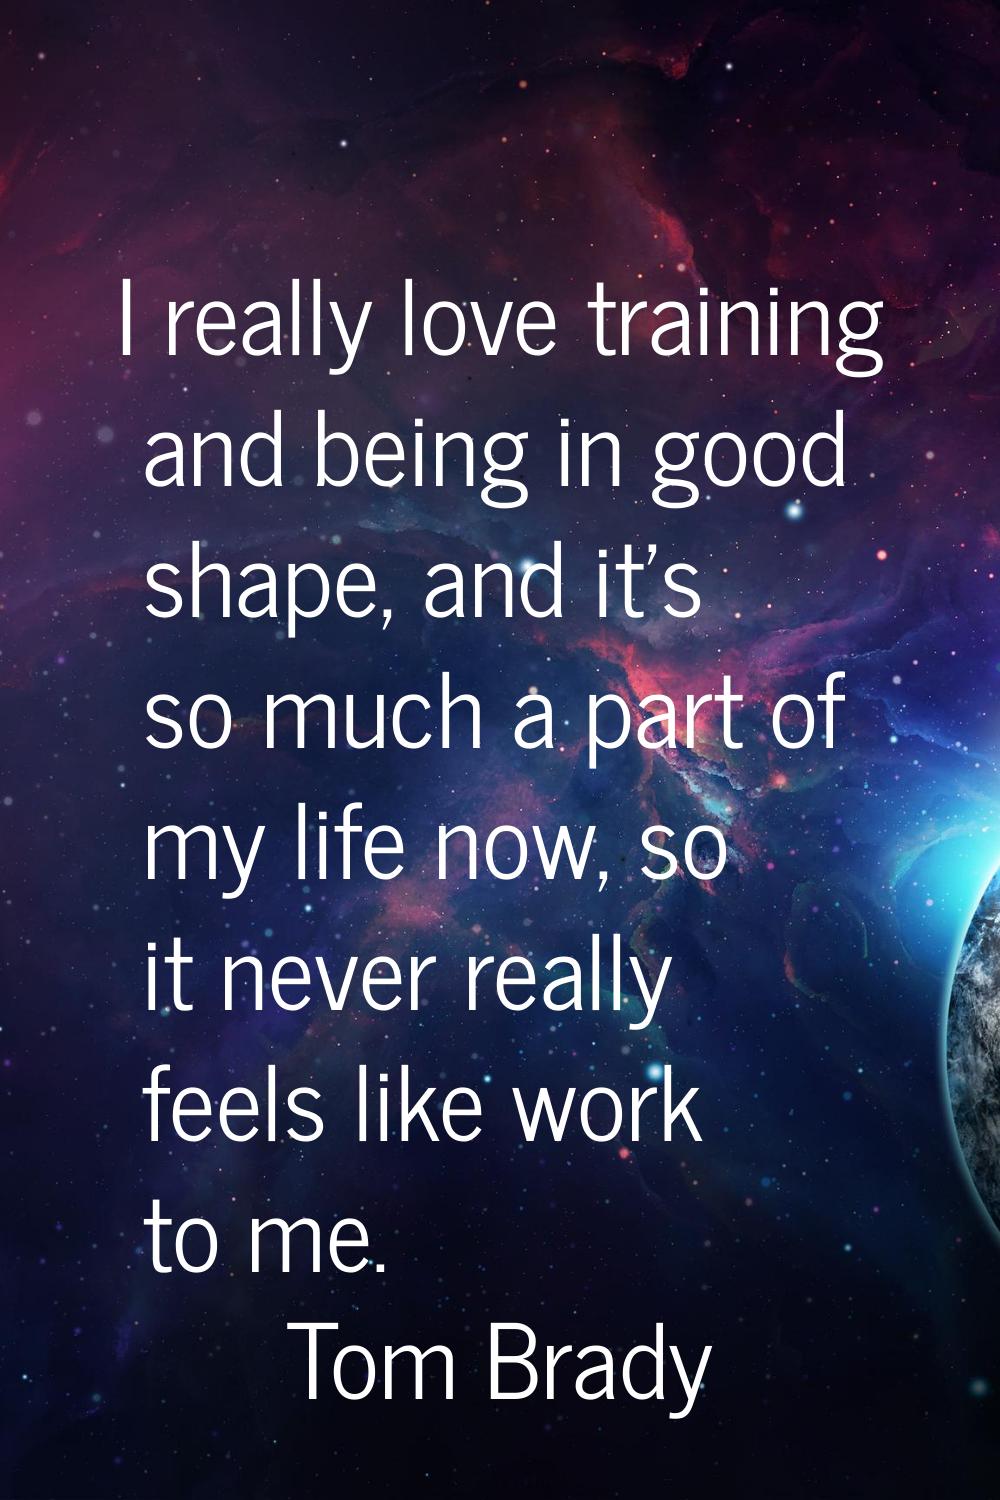 I really love training and being in good shape, and it's so much a part of my life now, so it never